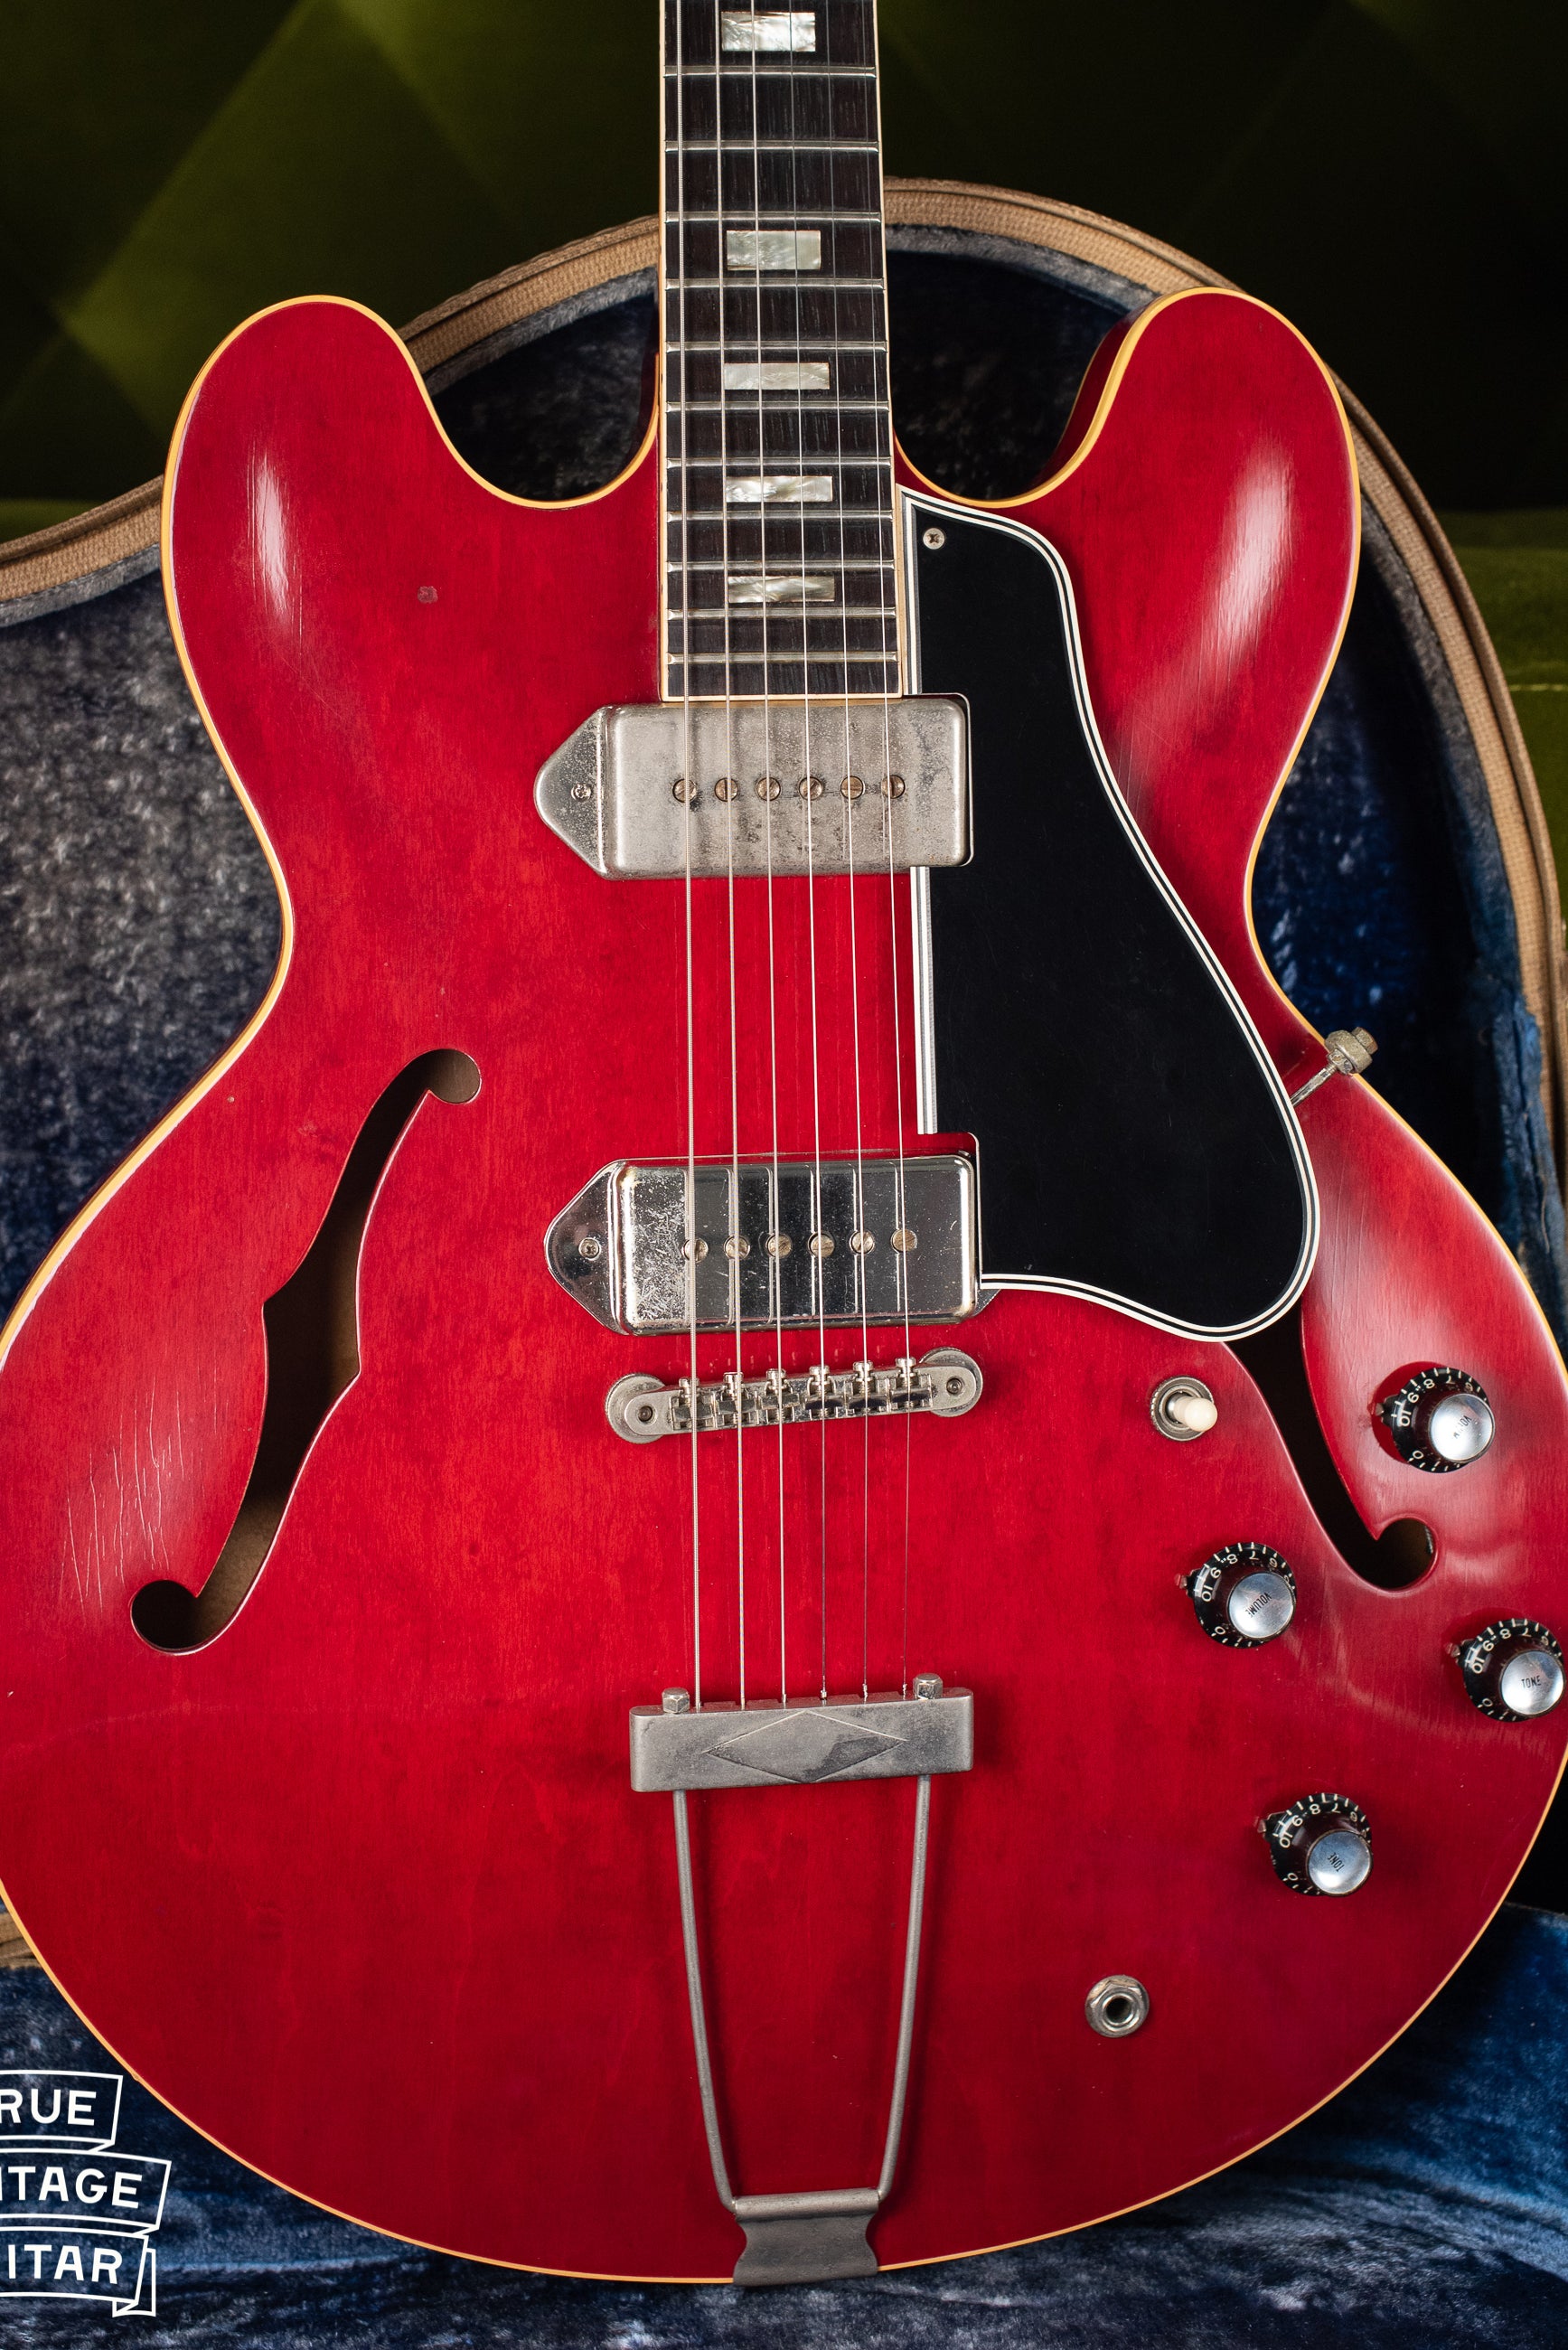 Vintage 1962 Gibson ES-330 TDC Cherry Red electric guitar